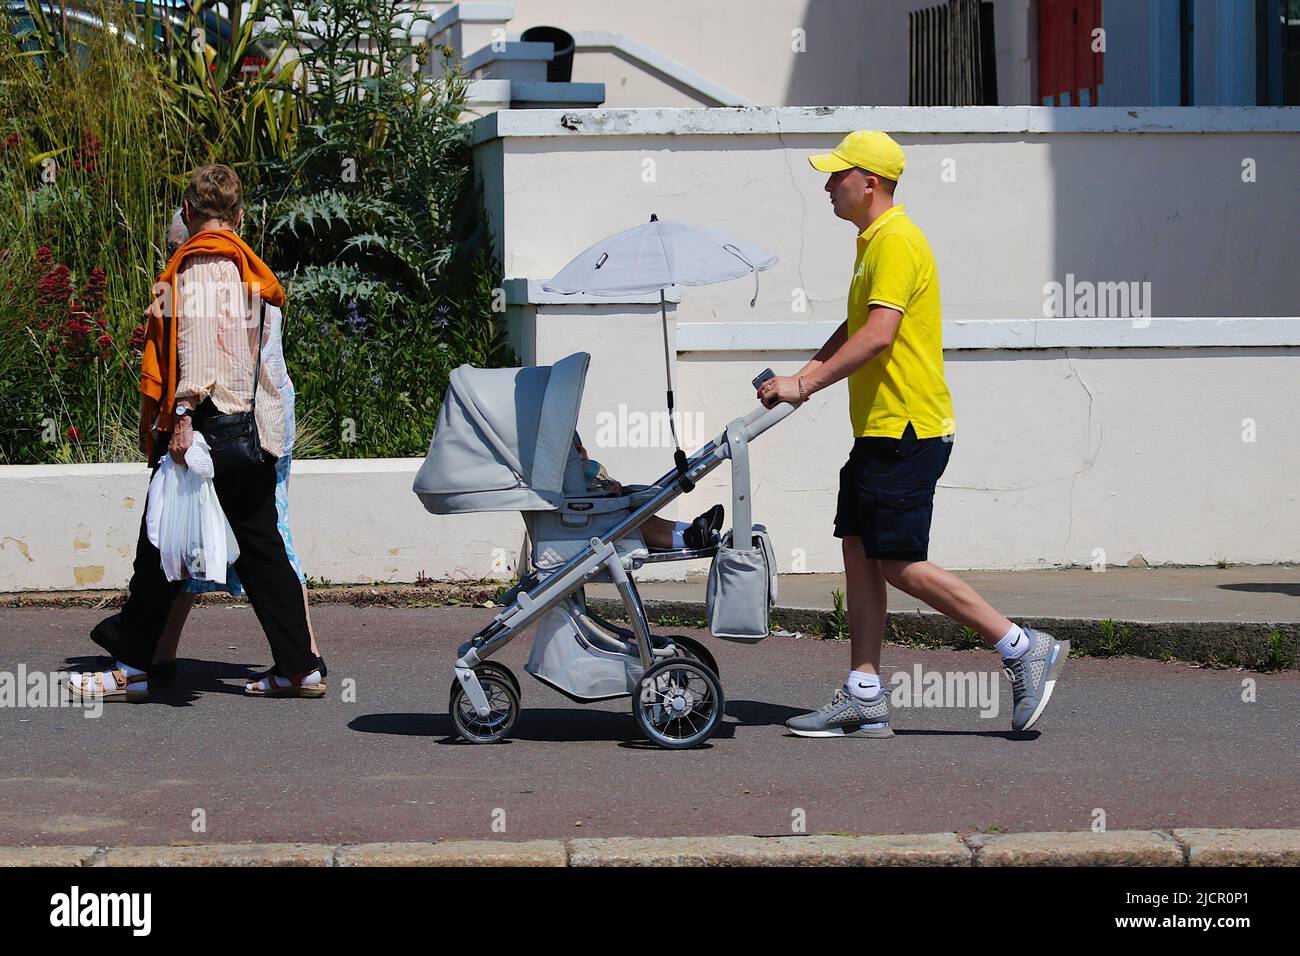 Hastings, East Sussex, UK. 15 Jun, 2022. UK Weather: Hot and sunny at the seaside town of Hastings in East Sussex as Brits enjoy the warm weather today along the seafront promenade. Man in a bright yellow top and cap pushing a stroller in the hot and sunny weather. Photo Credit: Paul Lawrenson /Alamy Live News Stock Photo